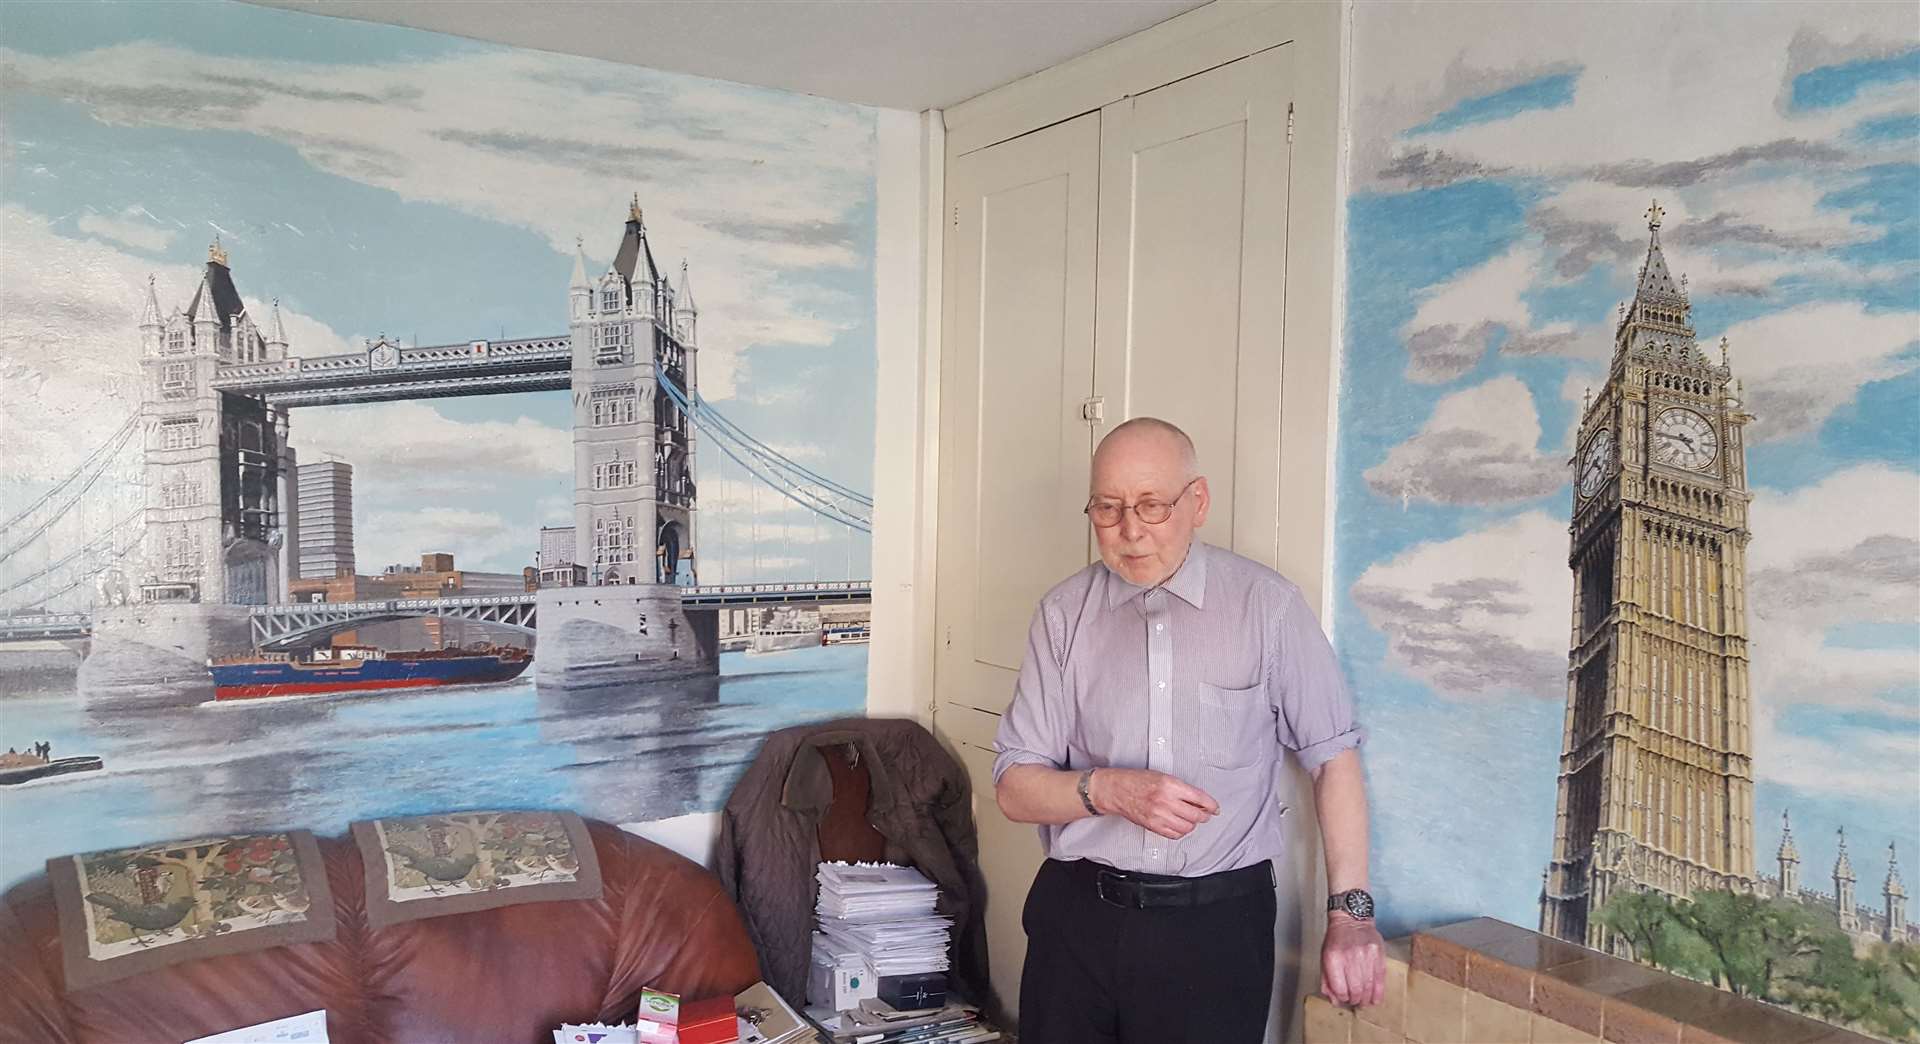 Bob Hall in his flat at Priory Mews care home, Dartford, where he painted the walls with something different